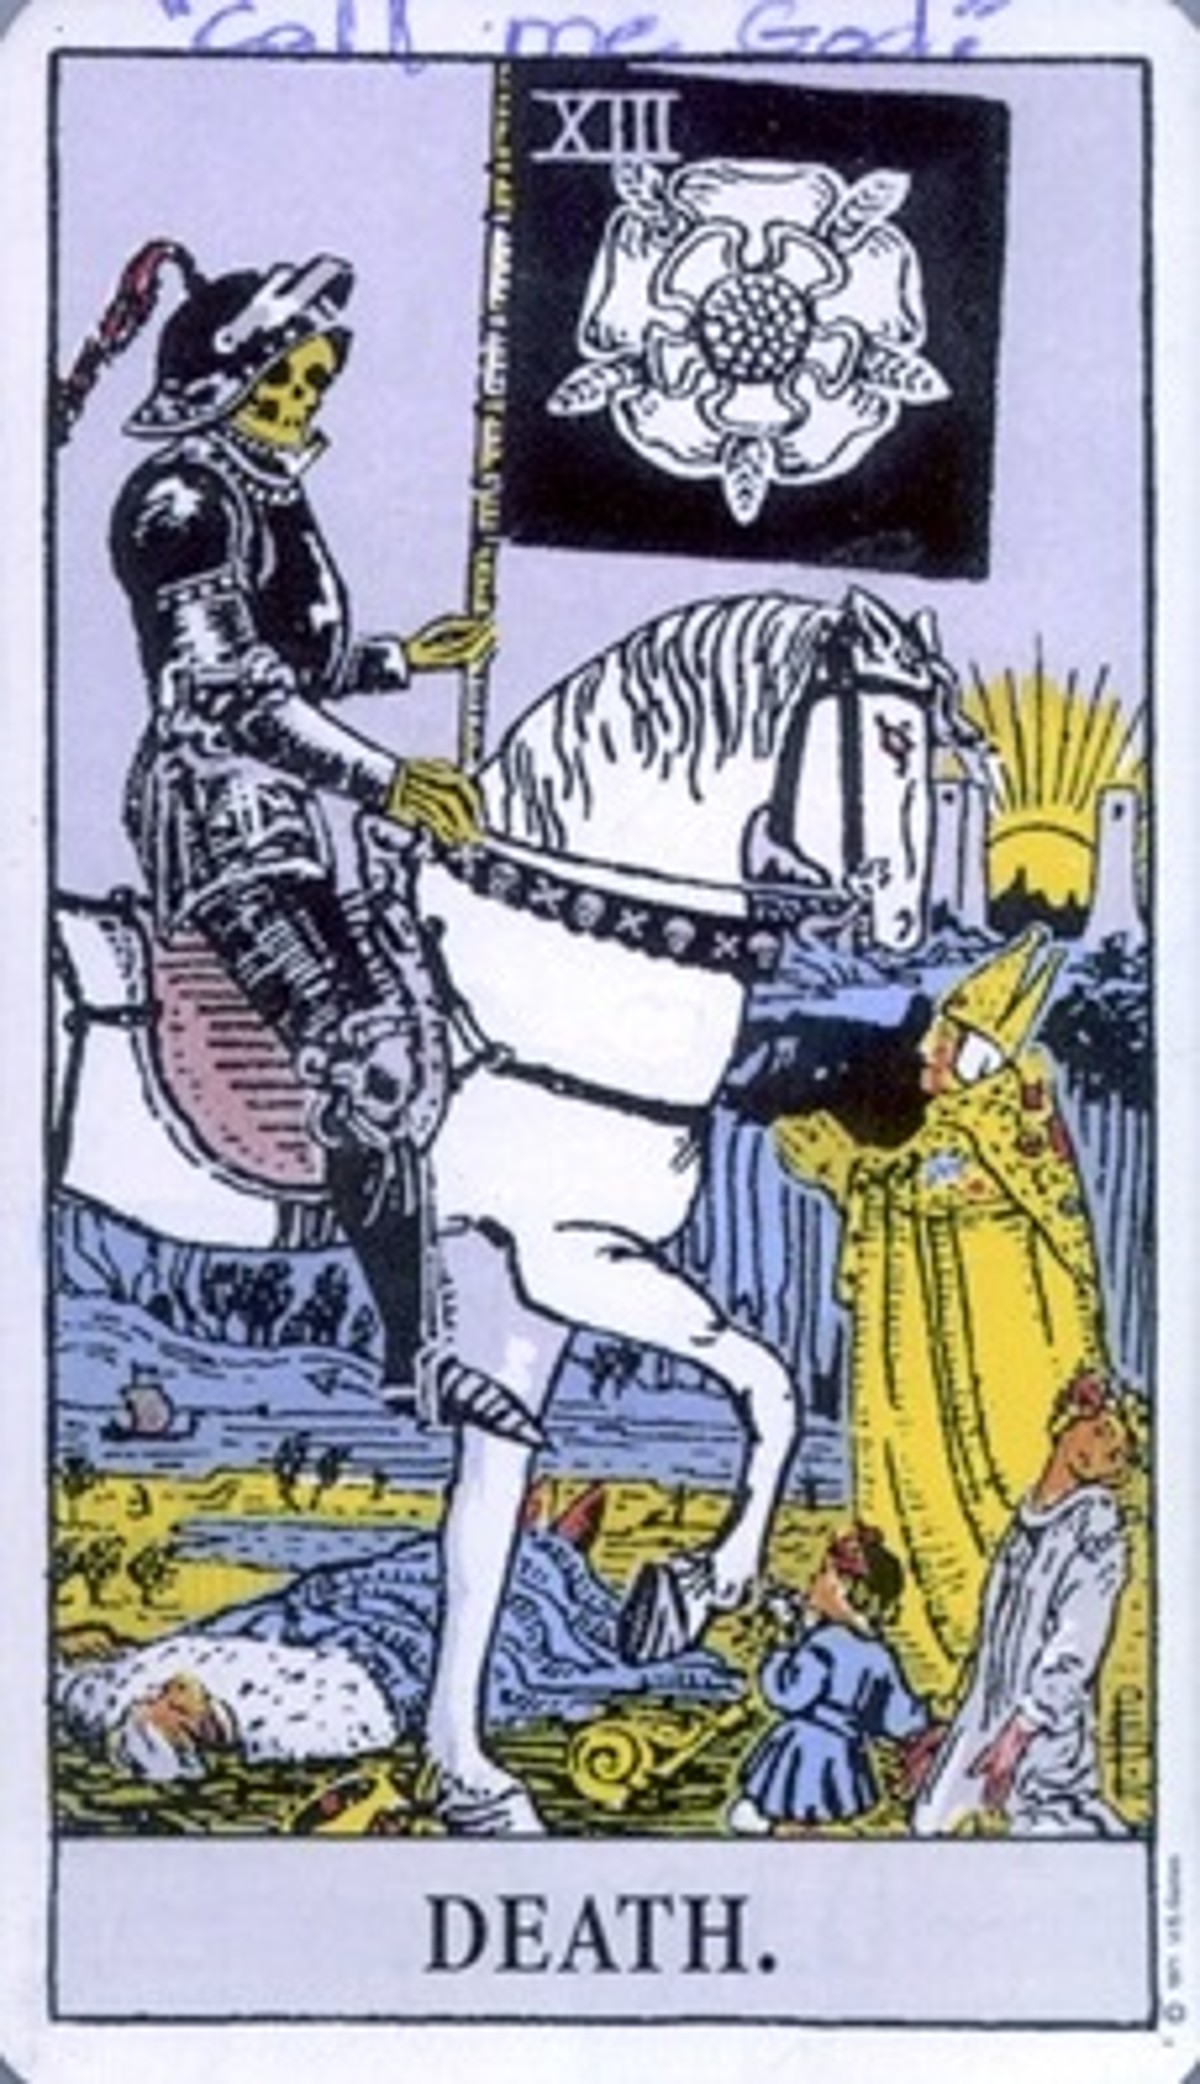 A Death Tarot card left by the Beltway snipers 